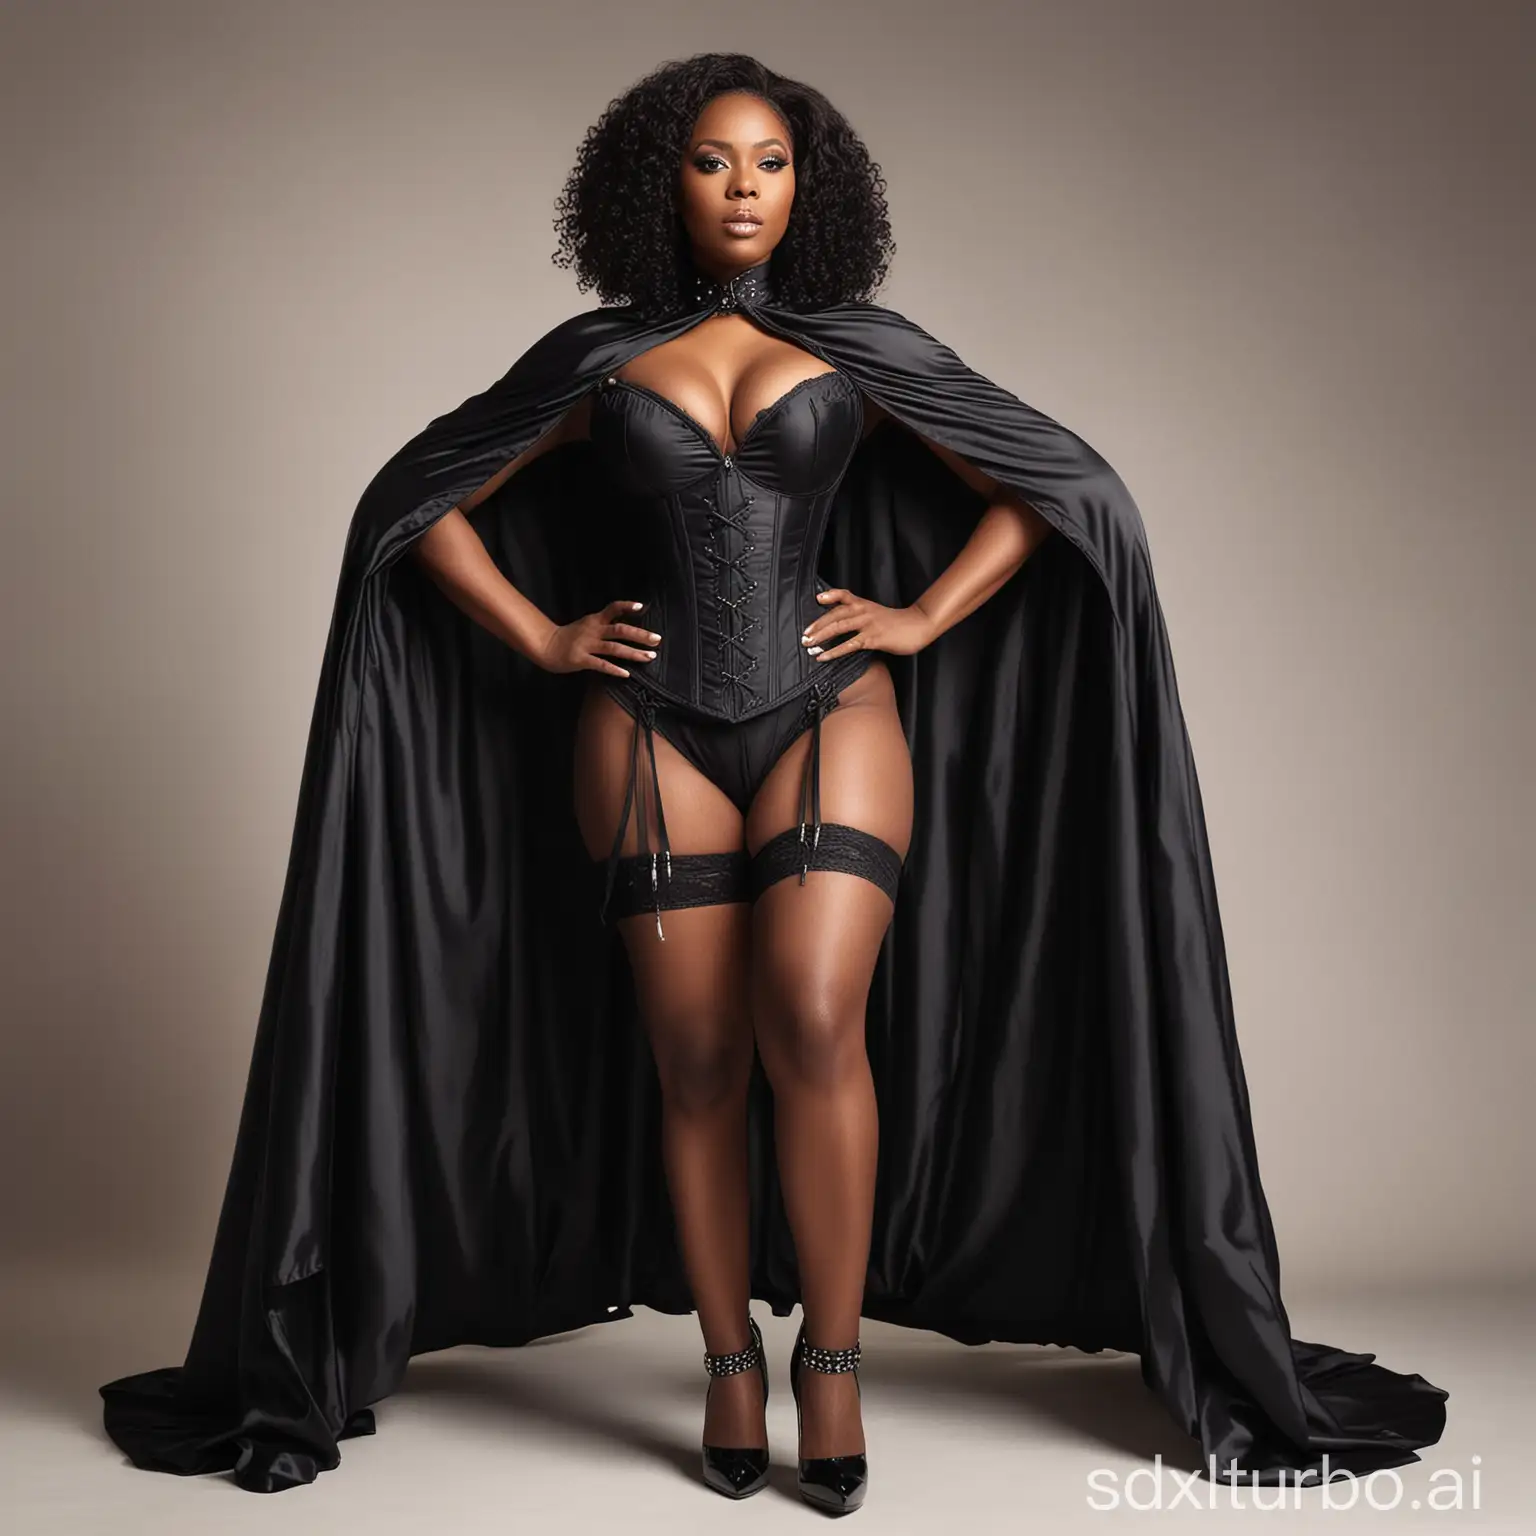 Sultry-Black-Woman-in-Gothic-Attire-with-Striking-Features